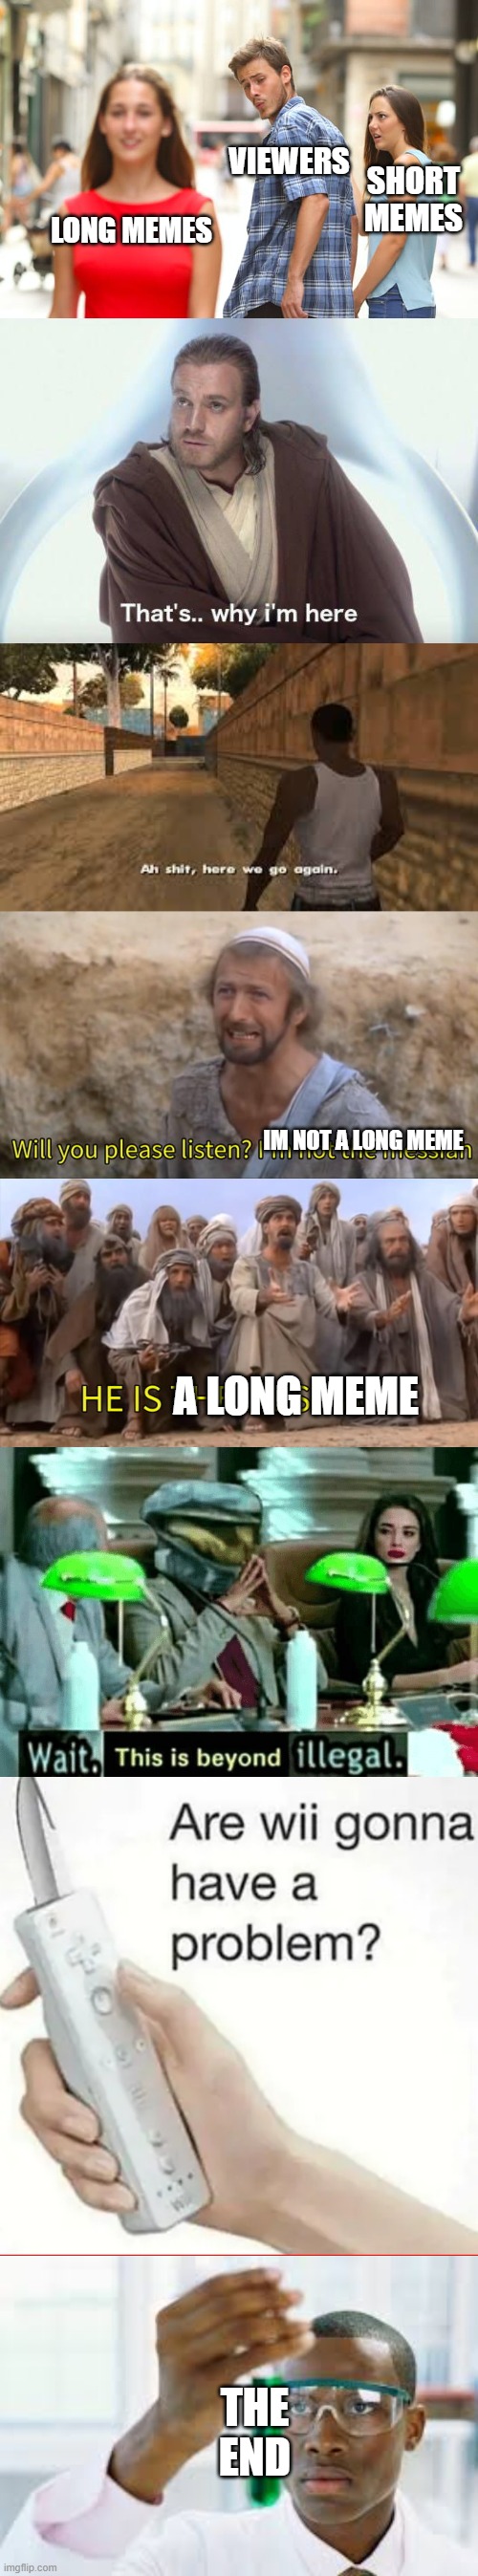 ITS BEEN SO LONG | VIEWERS; SHORT MEMES; LONG MEMES; IM NOT A LONG MEME; A LONG MEME; THE END | image tagged in memes,distracted boyfriend,thats why im here,ah shit here we go again,i''m not the messiah,wait this is beyond illegal | made w/ Imgflip meme maker